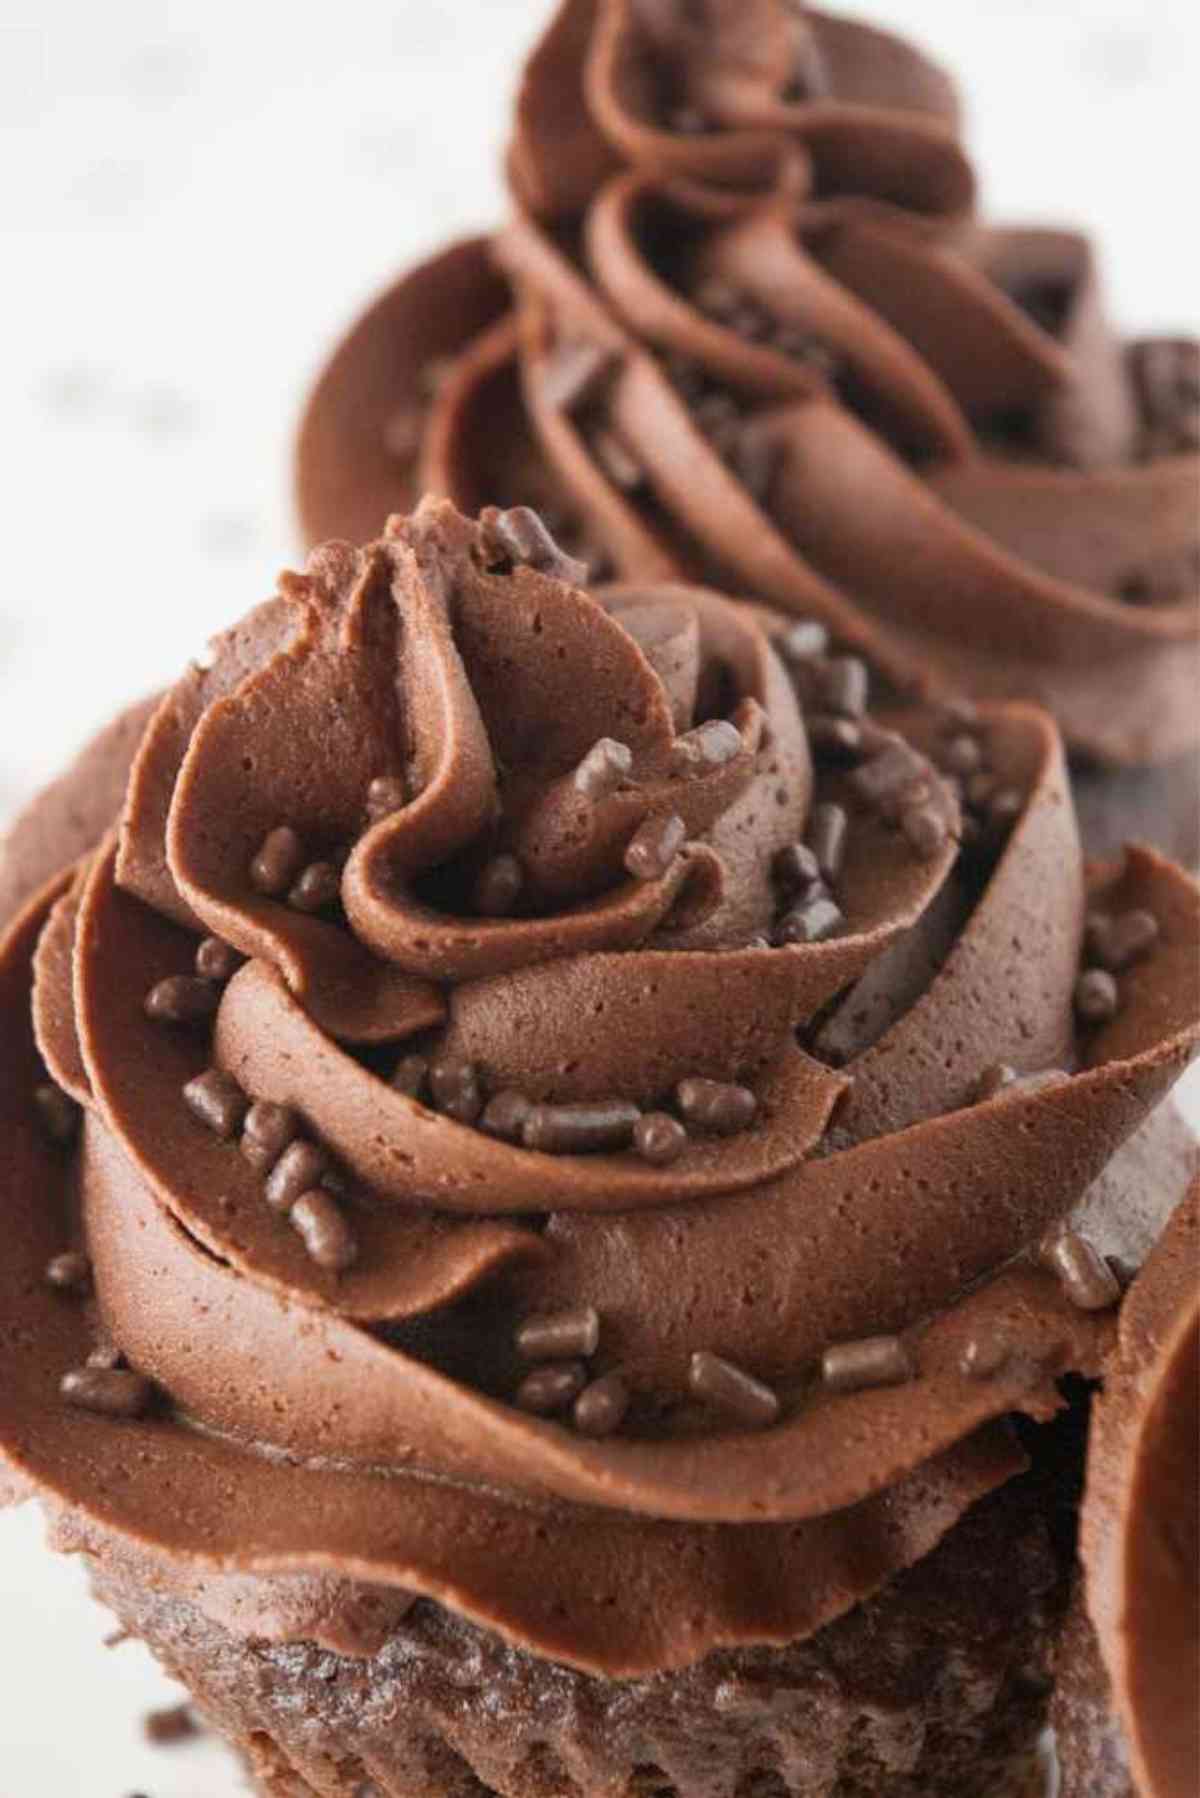 Chocolate cupcakes frosted with chocolate buttercream frosting.